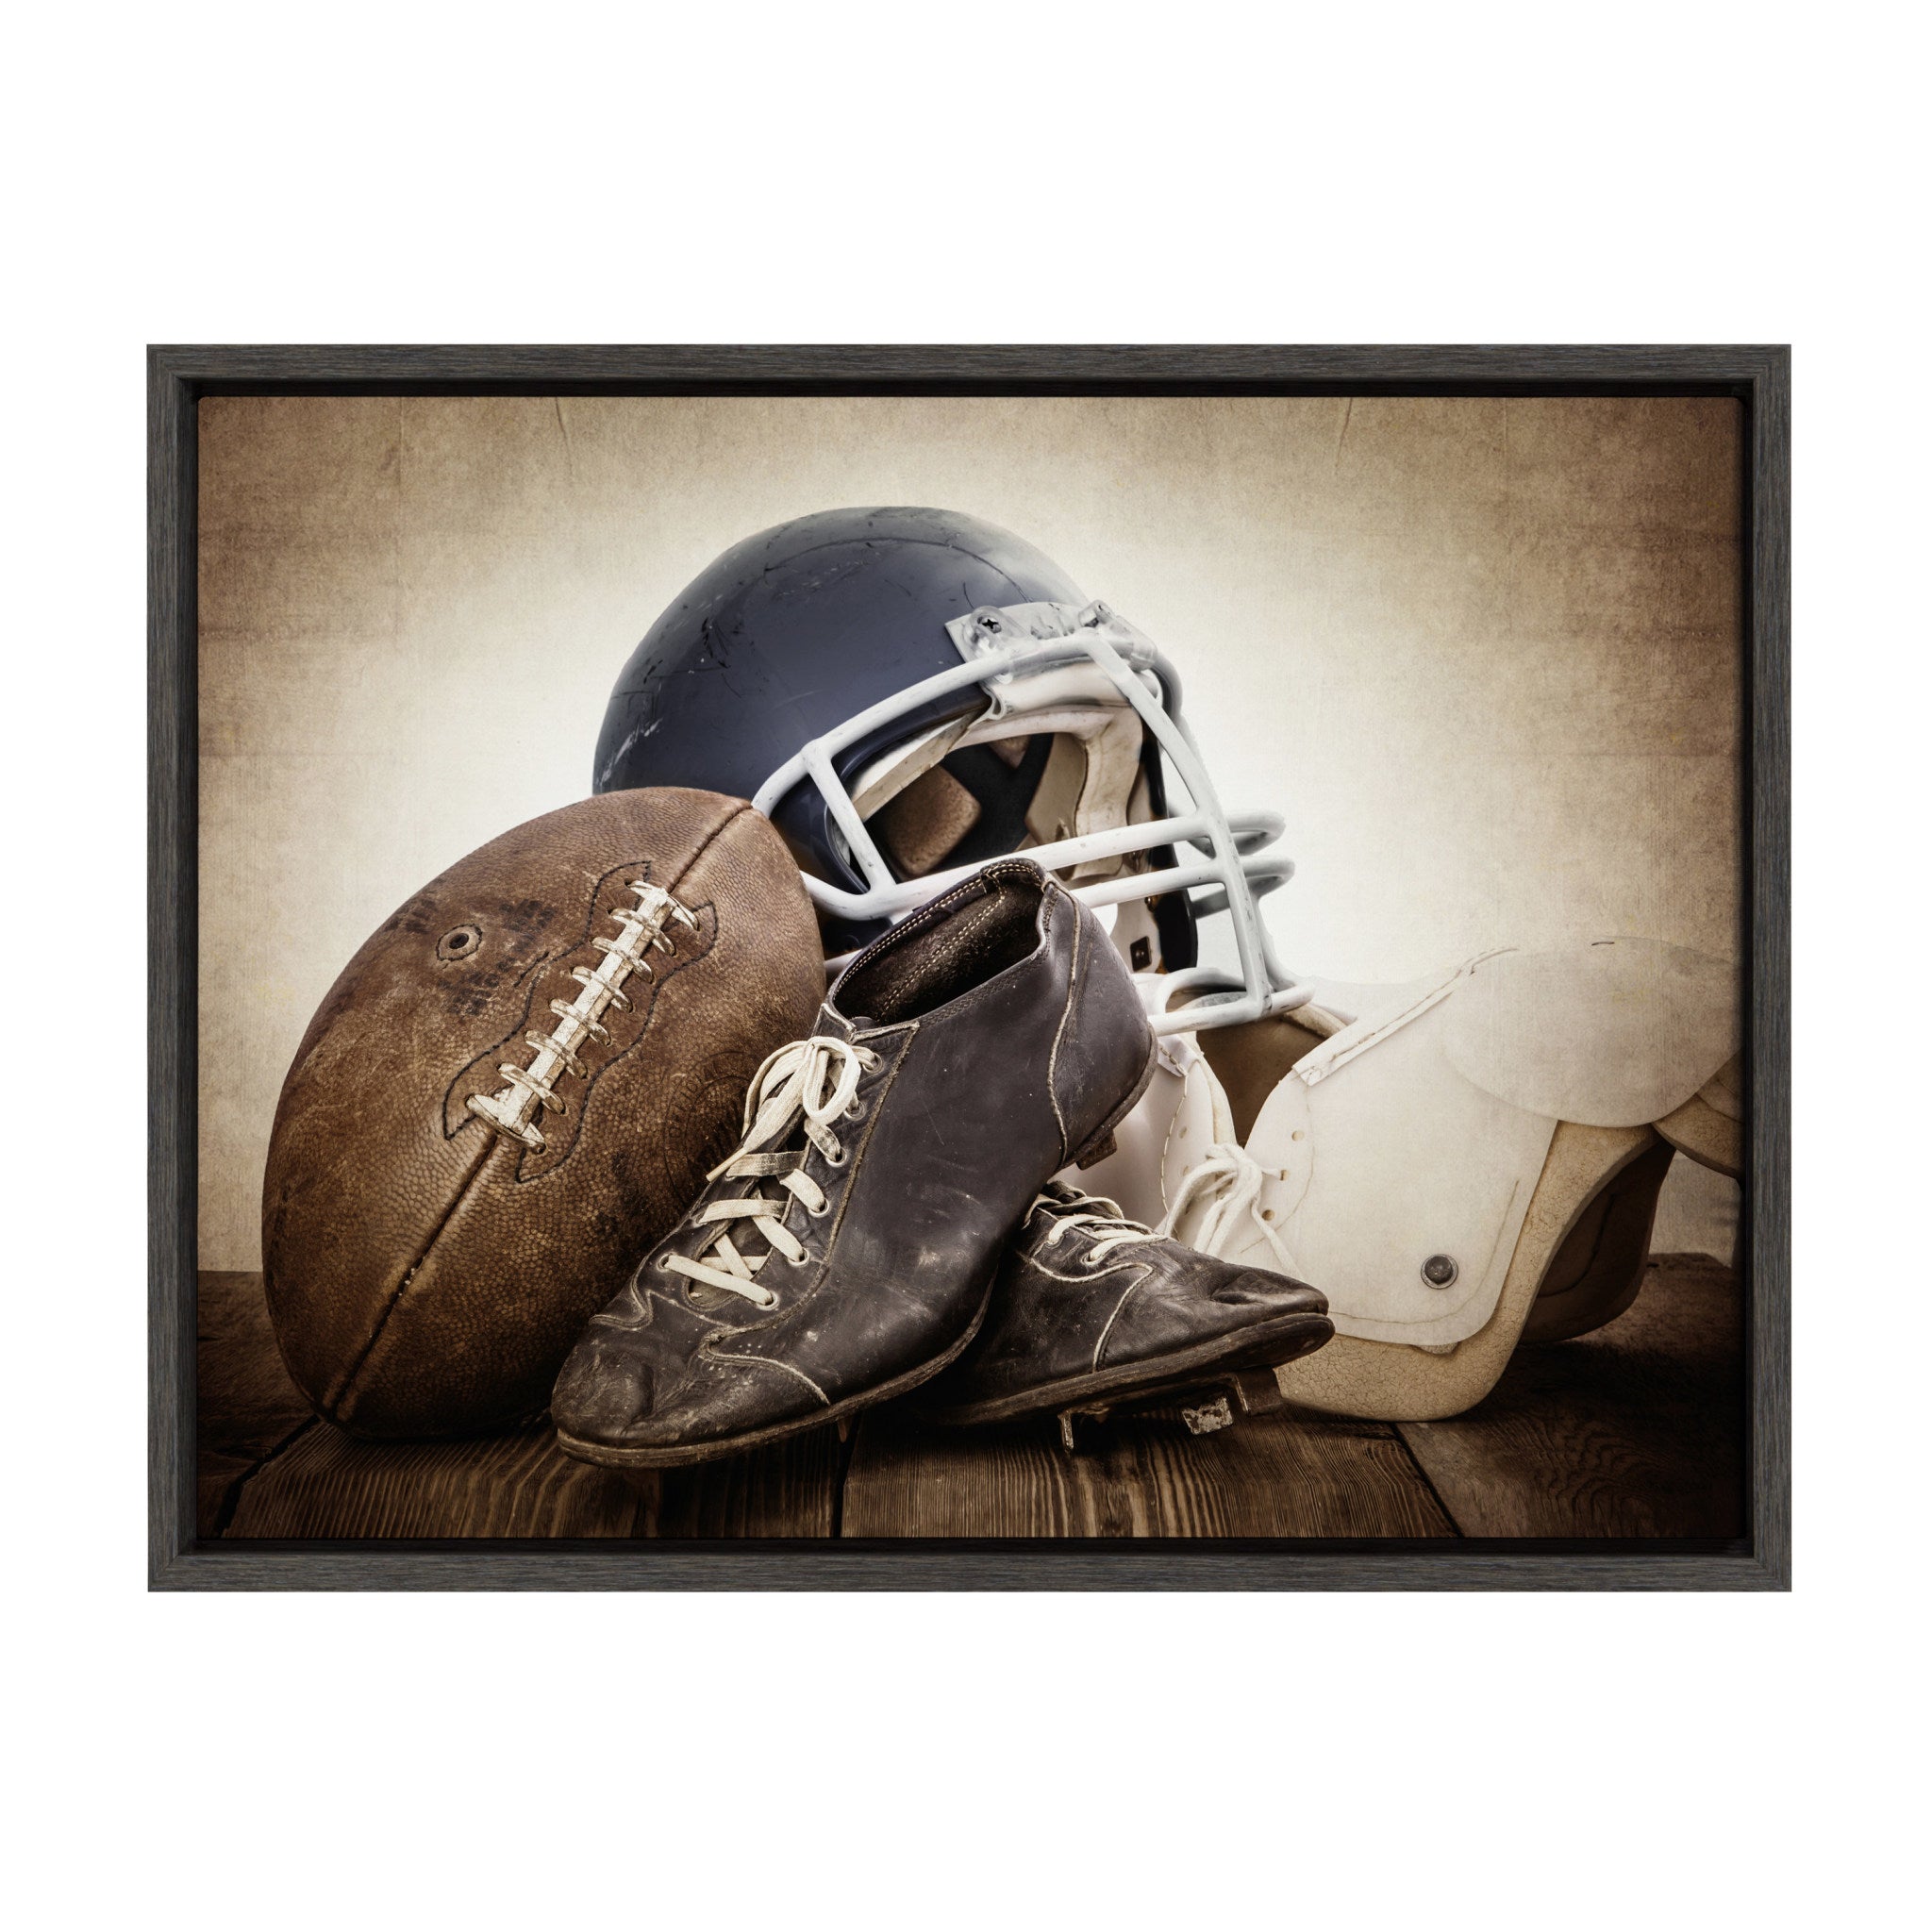 Sylvie Vintage Football Gear Framed Canvas by Shawn St. Peter